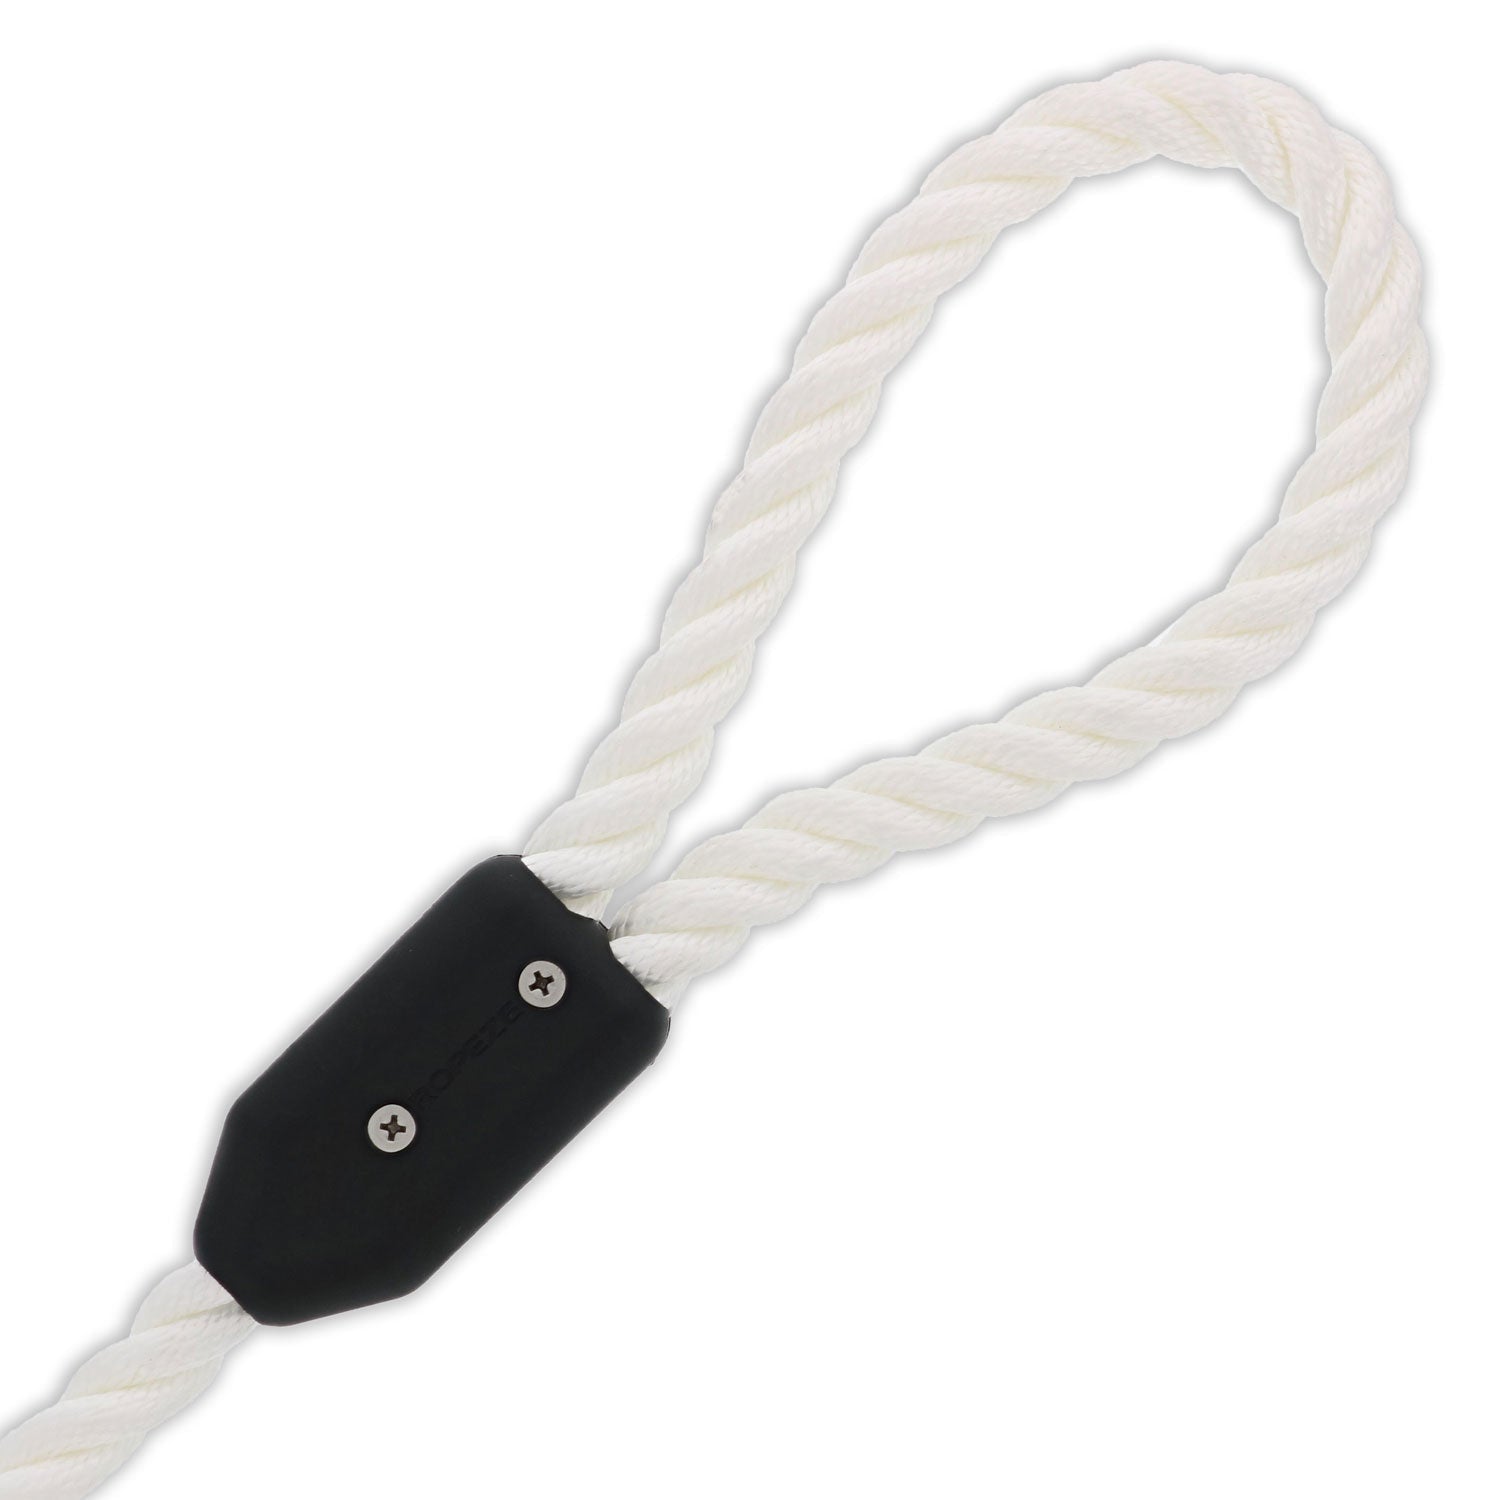 Ropeze Clamps